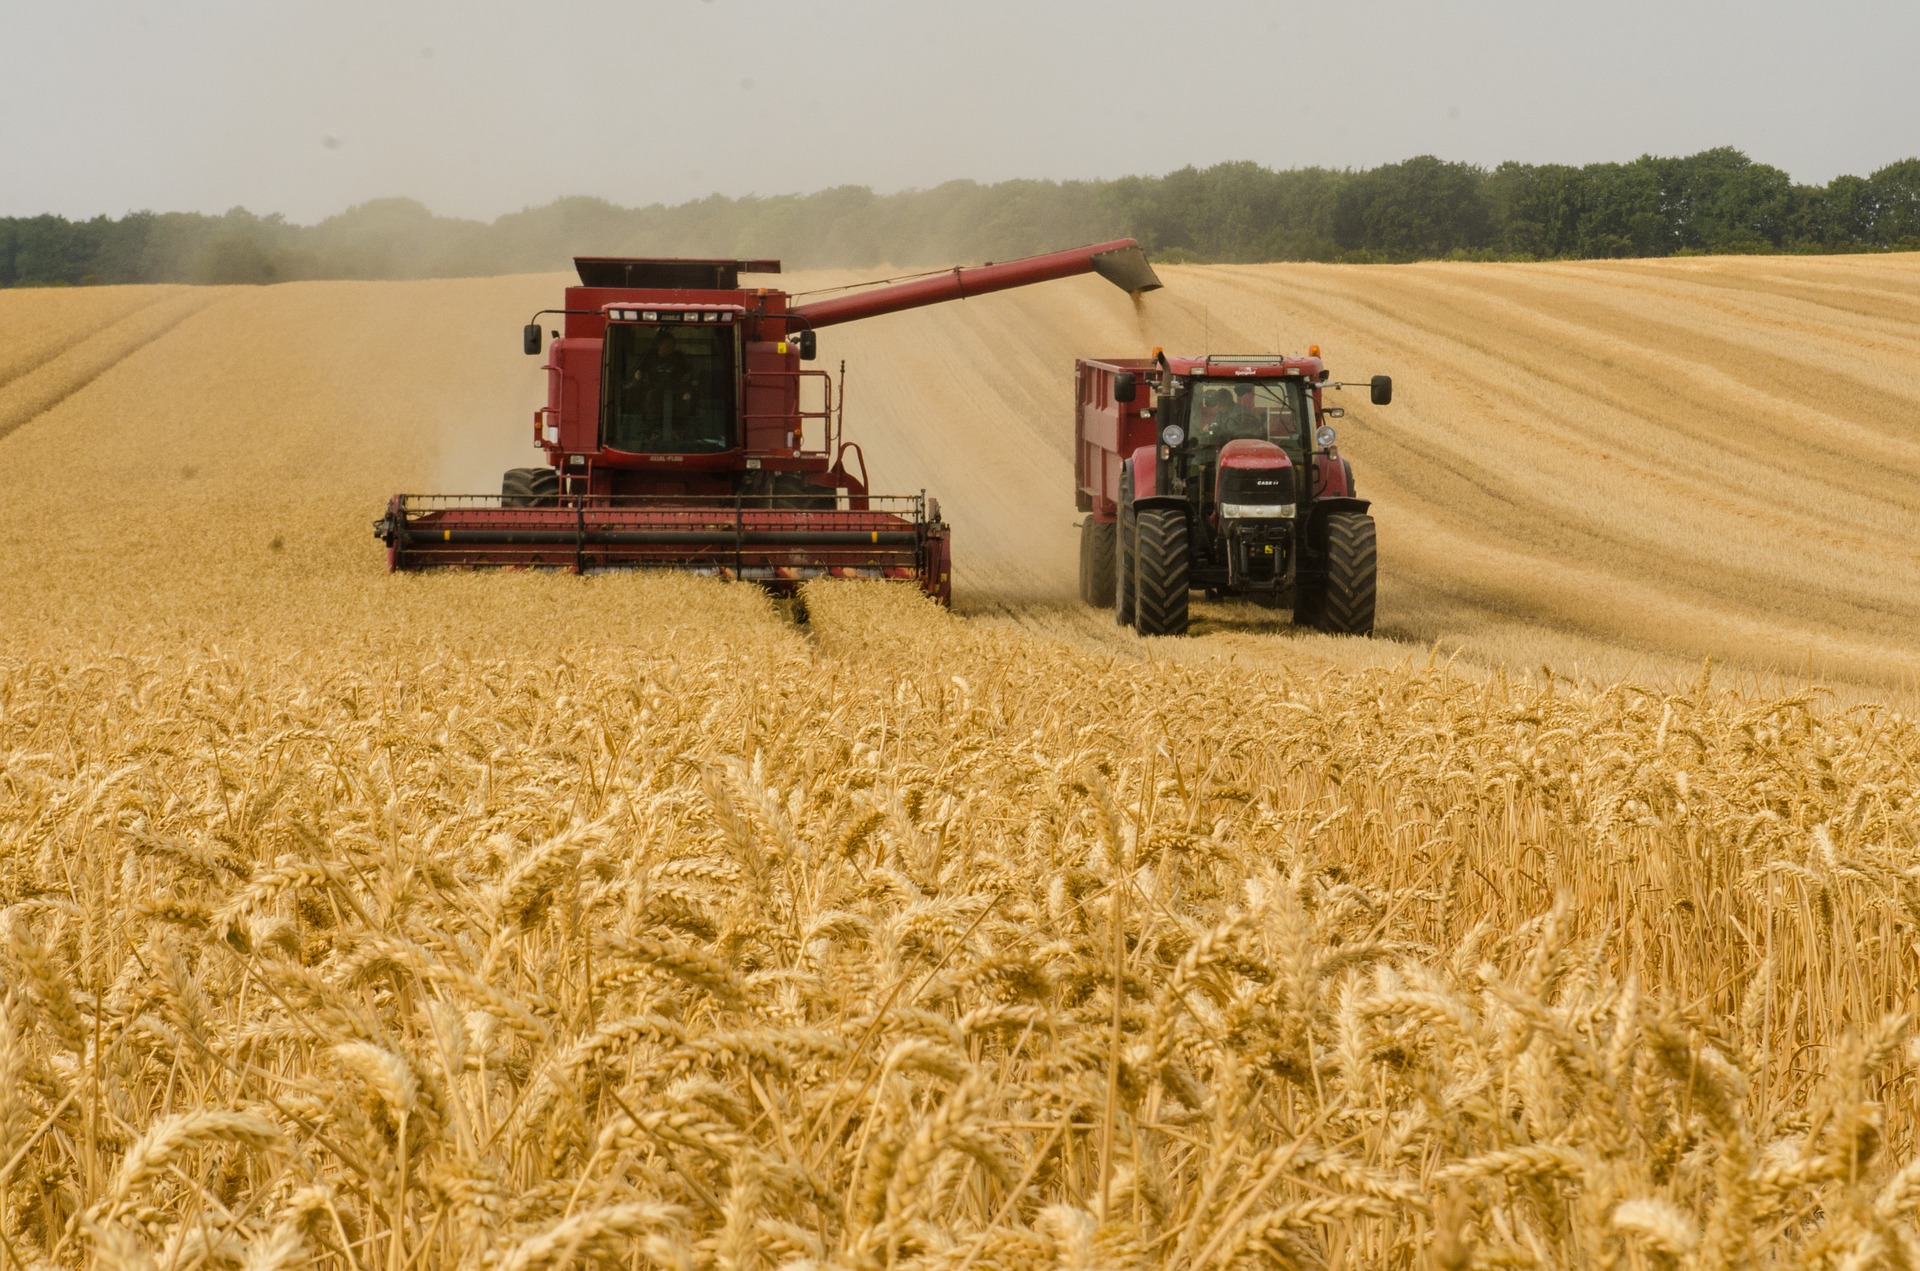 Possible escalation in Ukraine may undermine global food security, provoke sky-high food prices